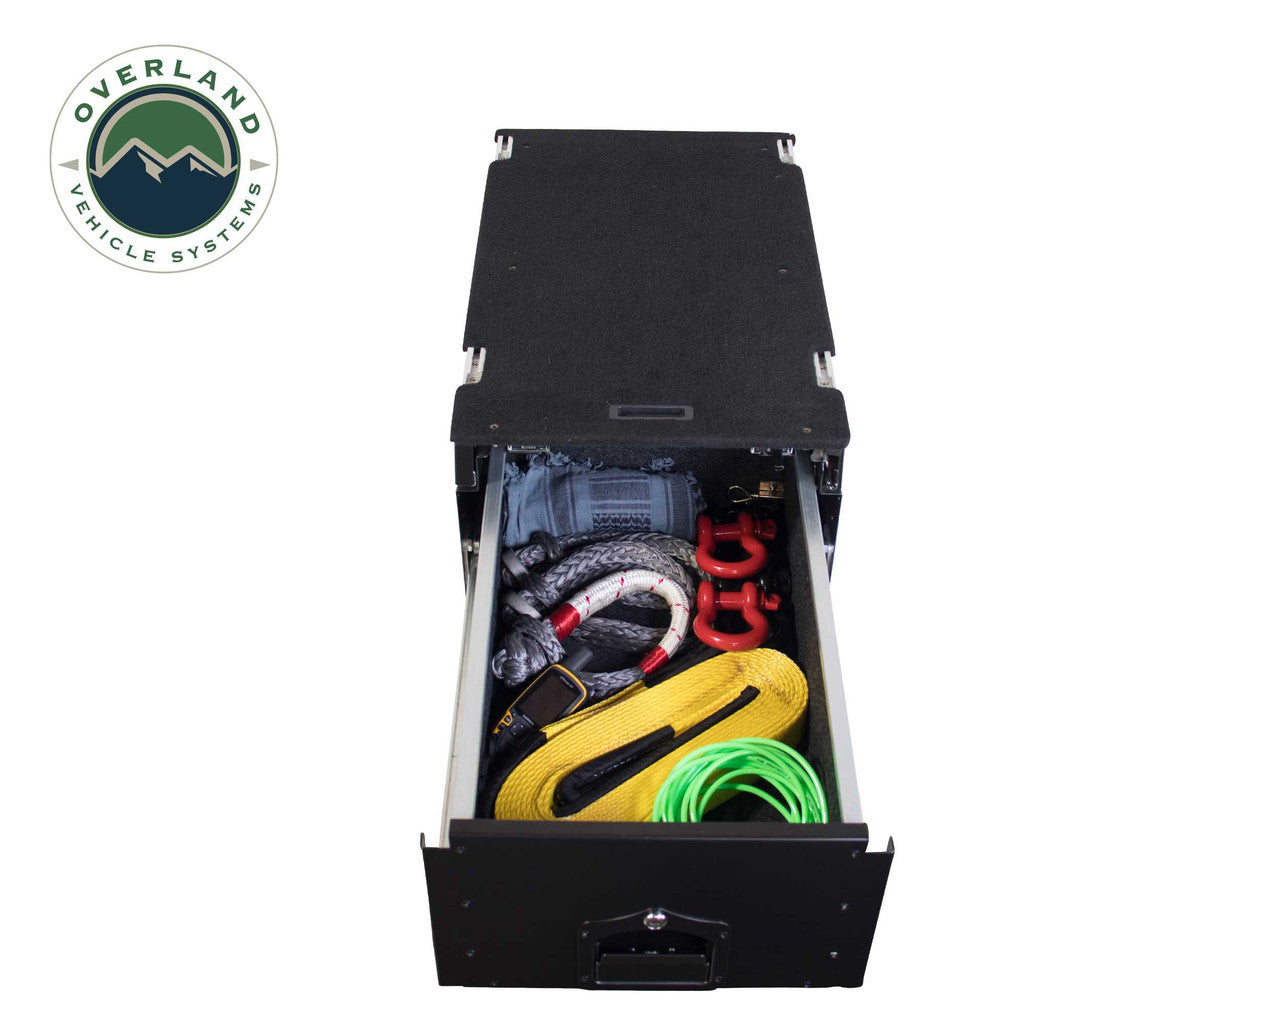 Overland Vehicle Systems Cargo Box With Slide Out Drawer & Working Station Size